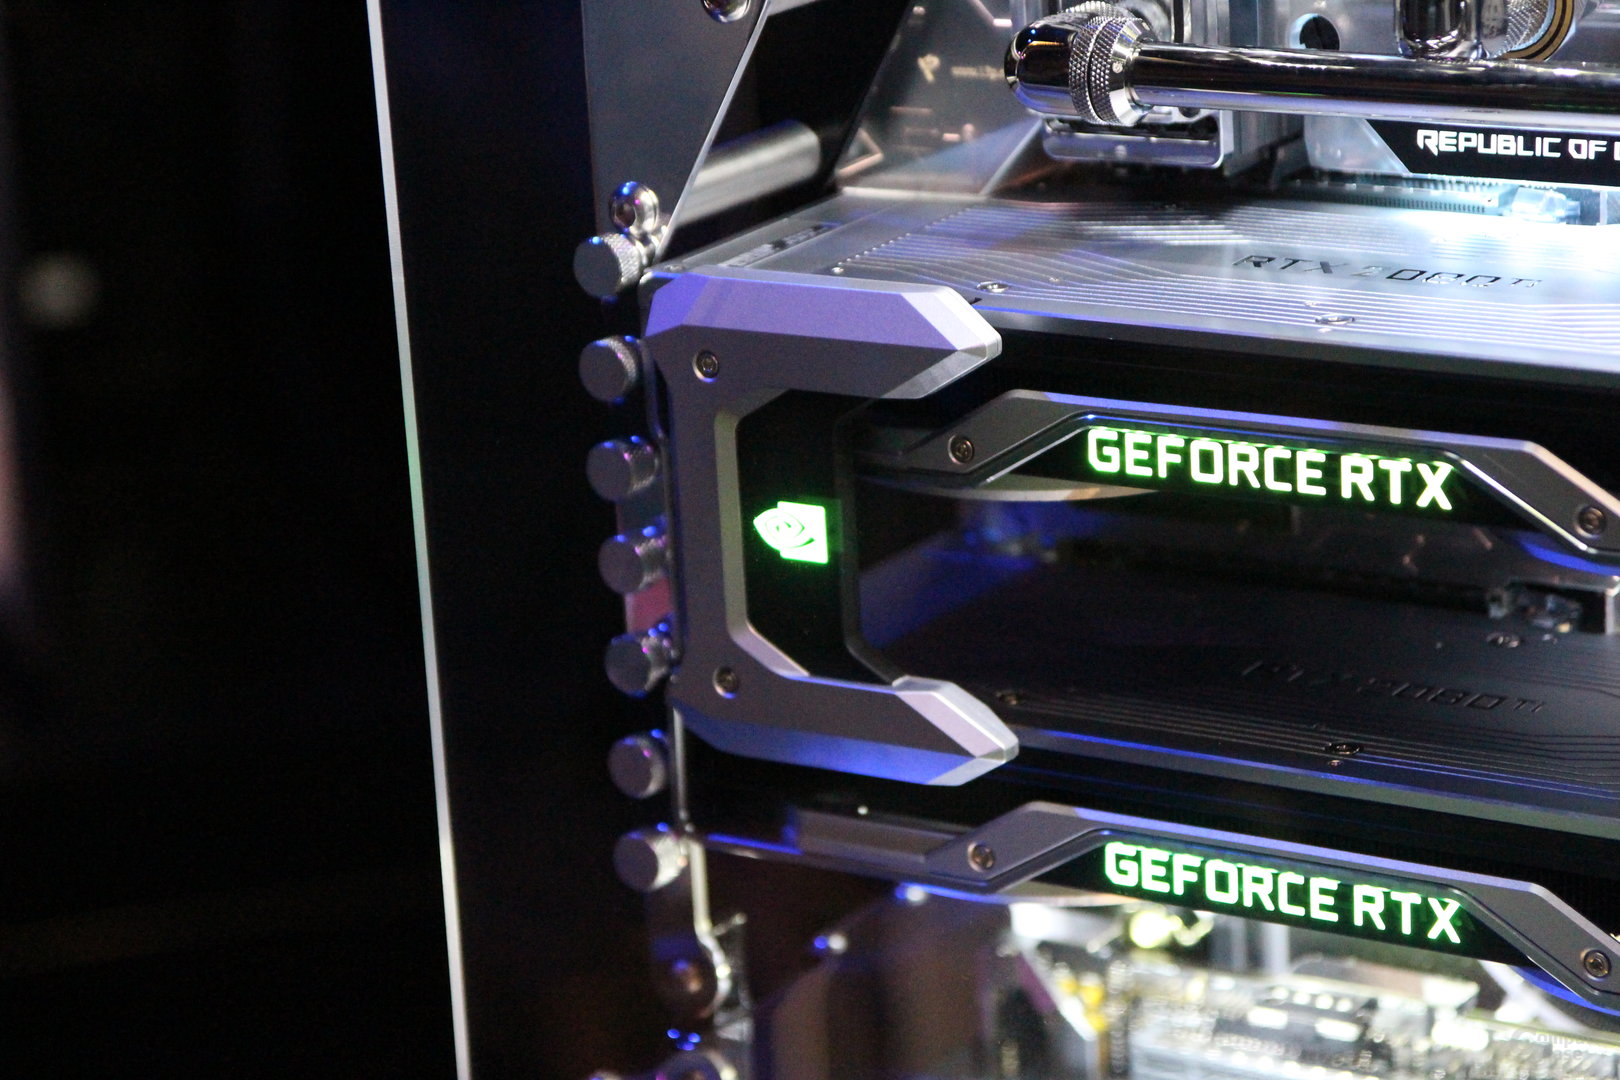 Nvidia GeForce RTX 2080 Ti Founders Edition